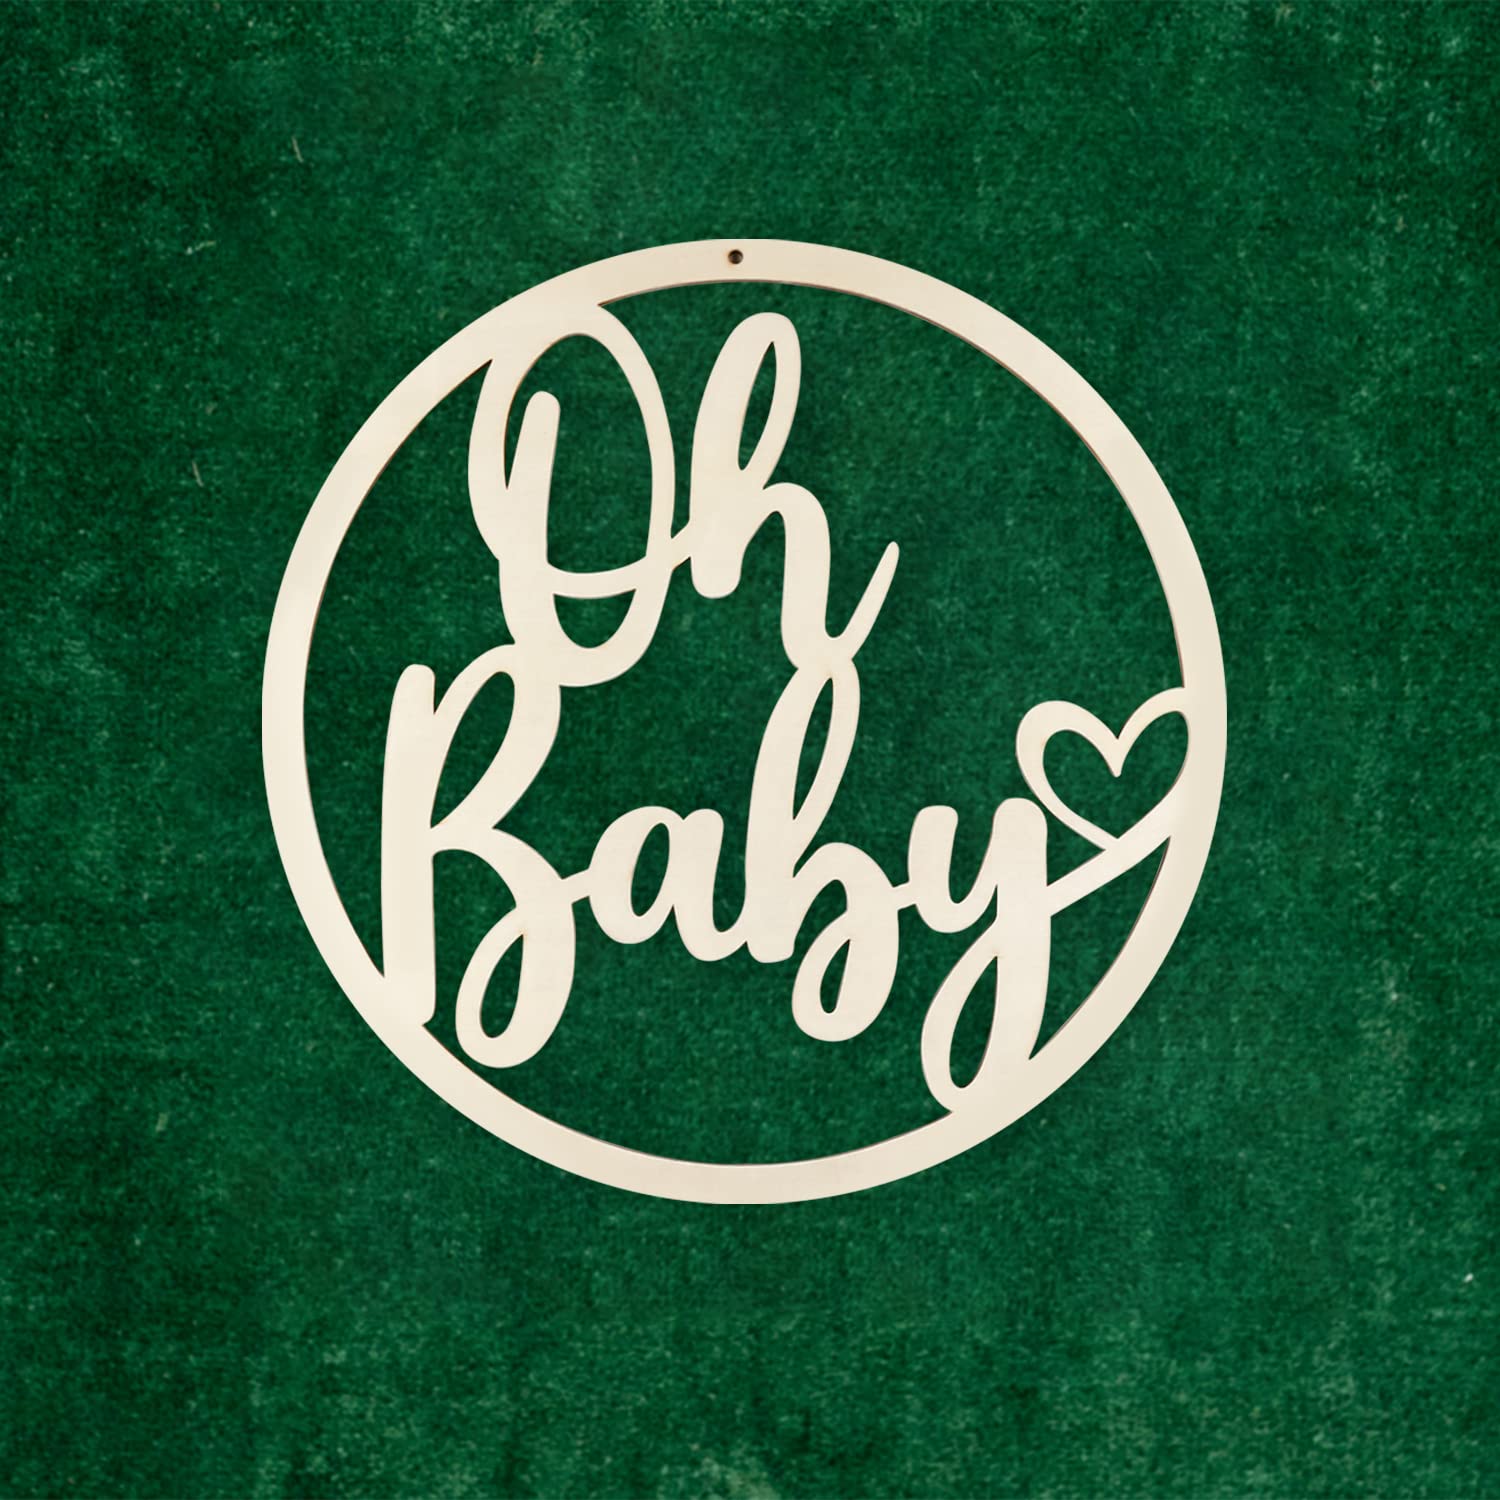 Large Wooden Oh Baby Sign 14 inch Letter Cutouts Wall Hanging Baby Shower Nursery Decor Big Round Circle Wood Oh Baby Signs for Backdrop Baby Announcements Gender Reveal Party Wall Photo Props